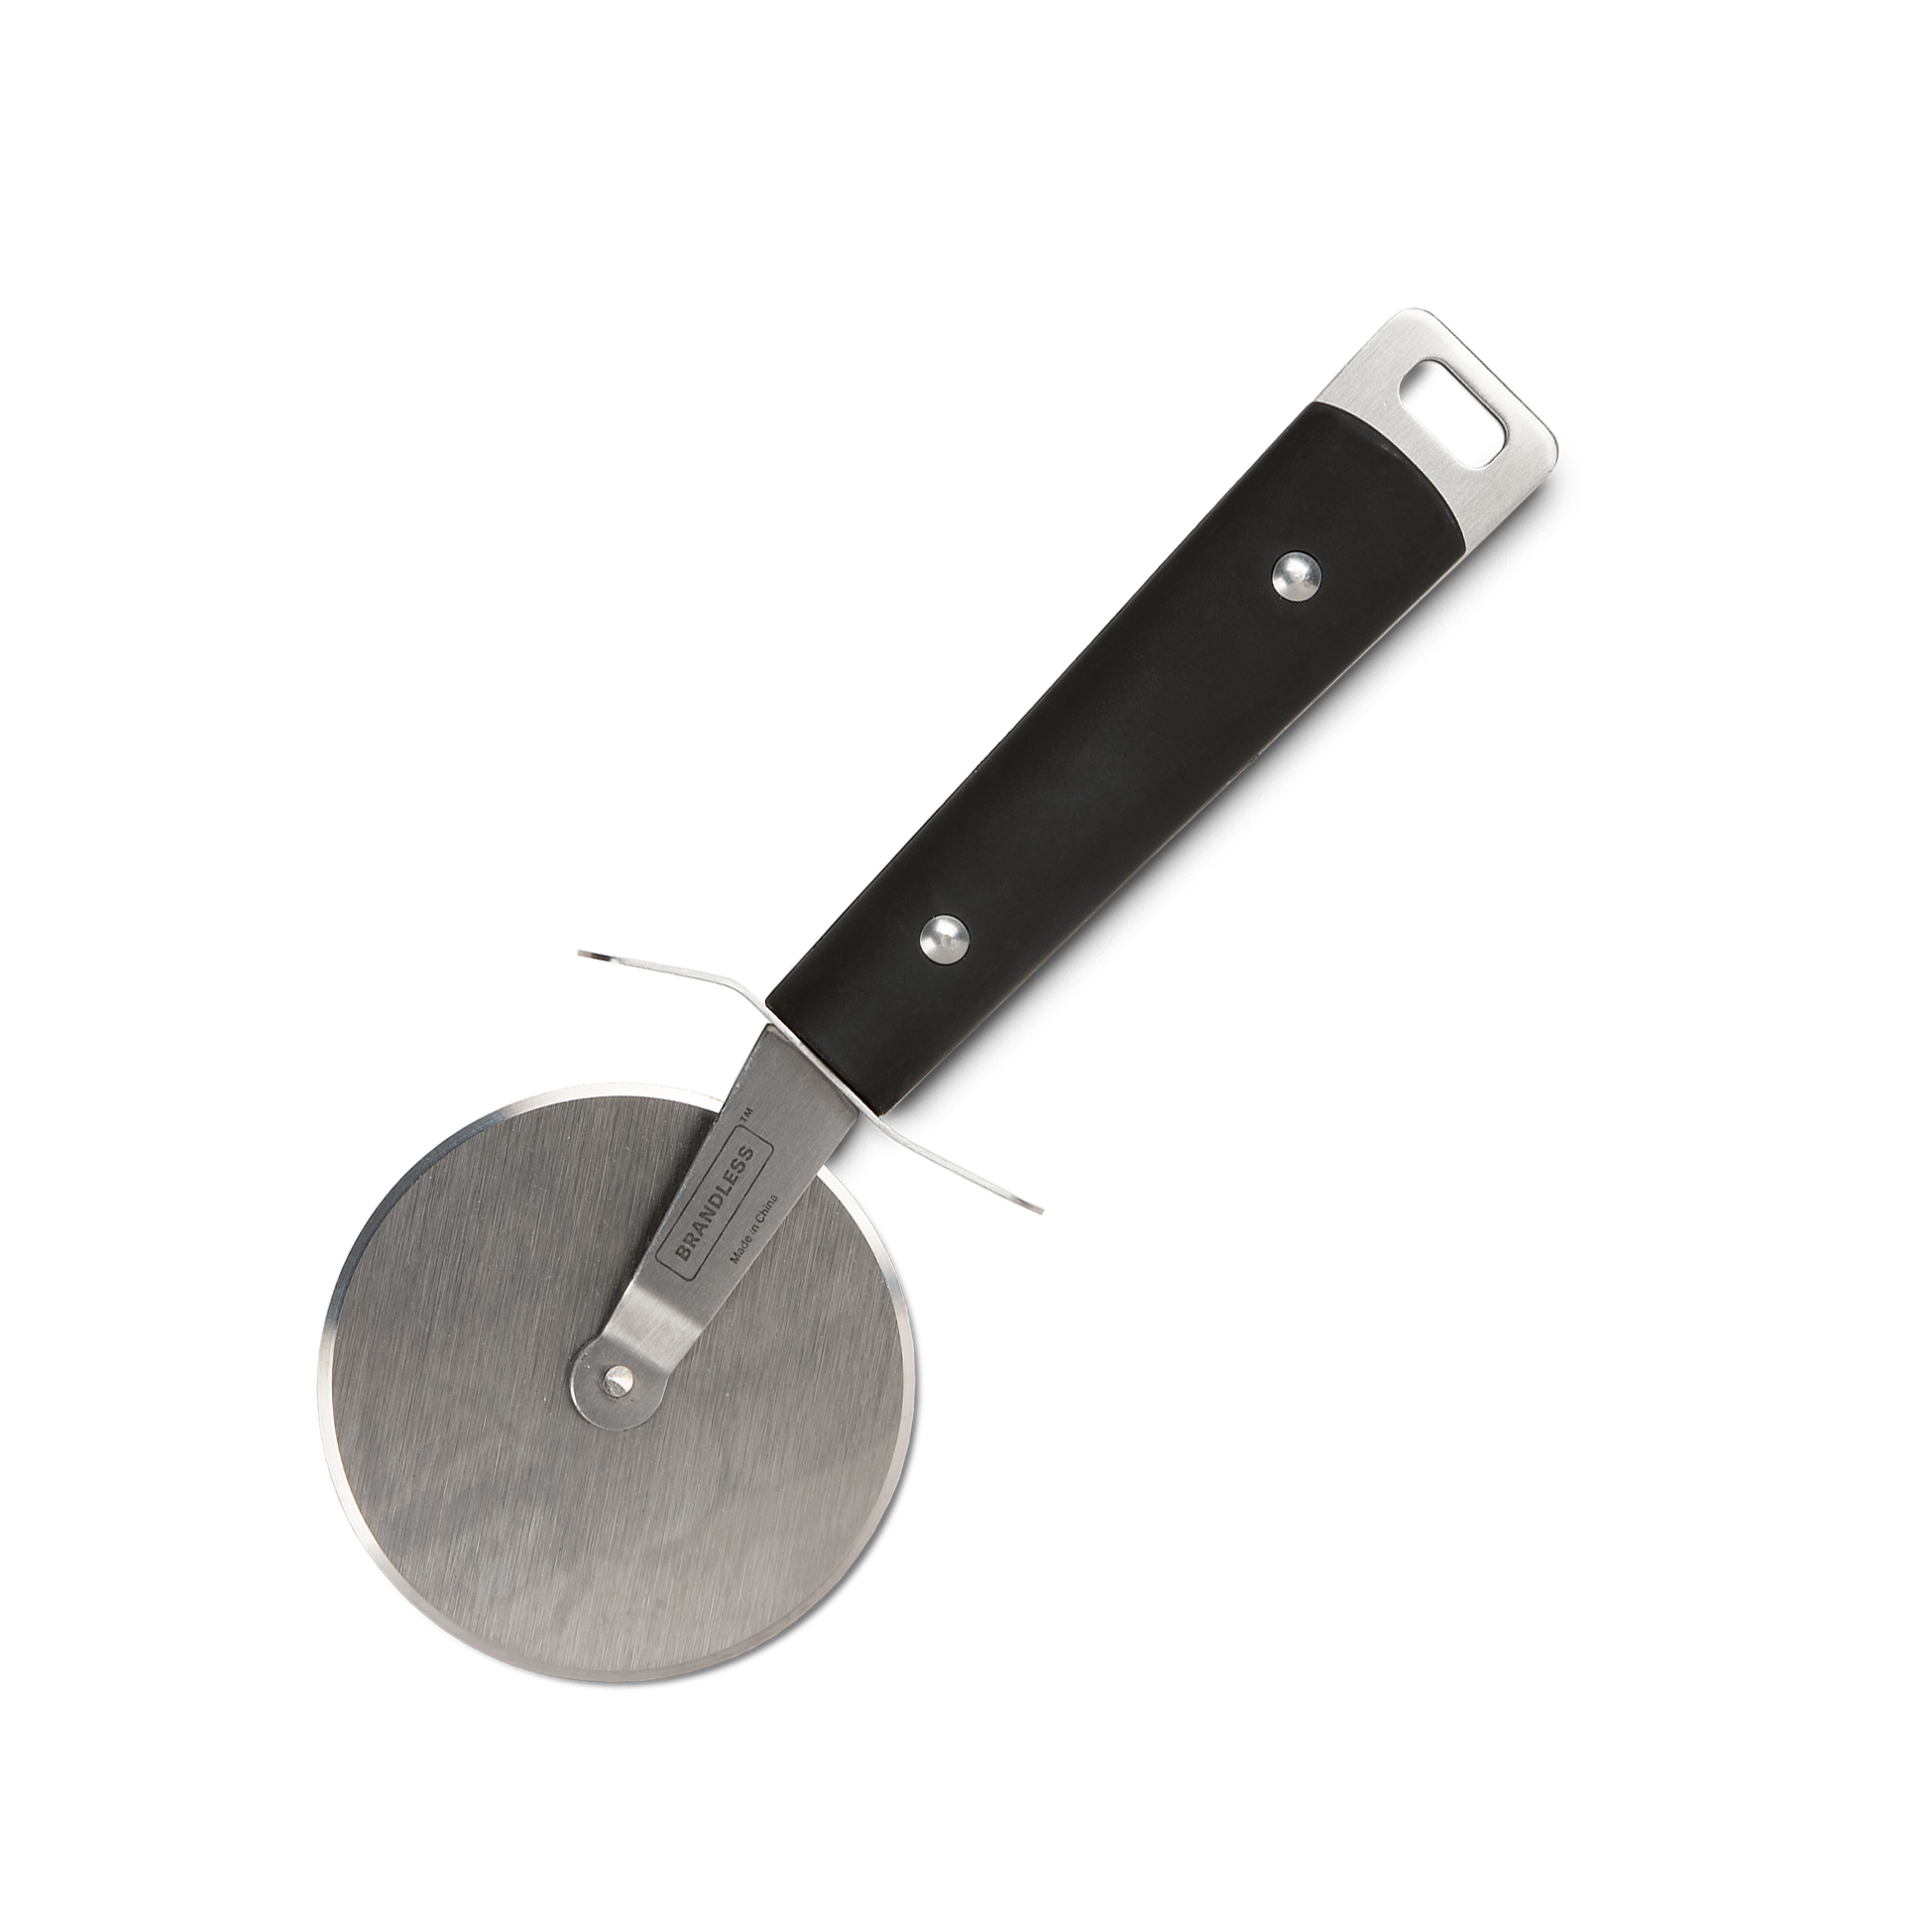 Side view, brandless branded pizza cutter, made in china.